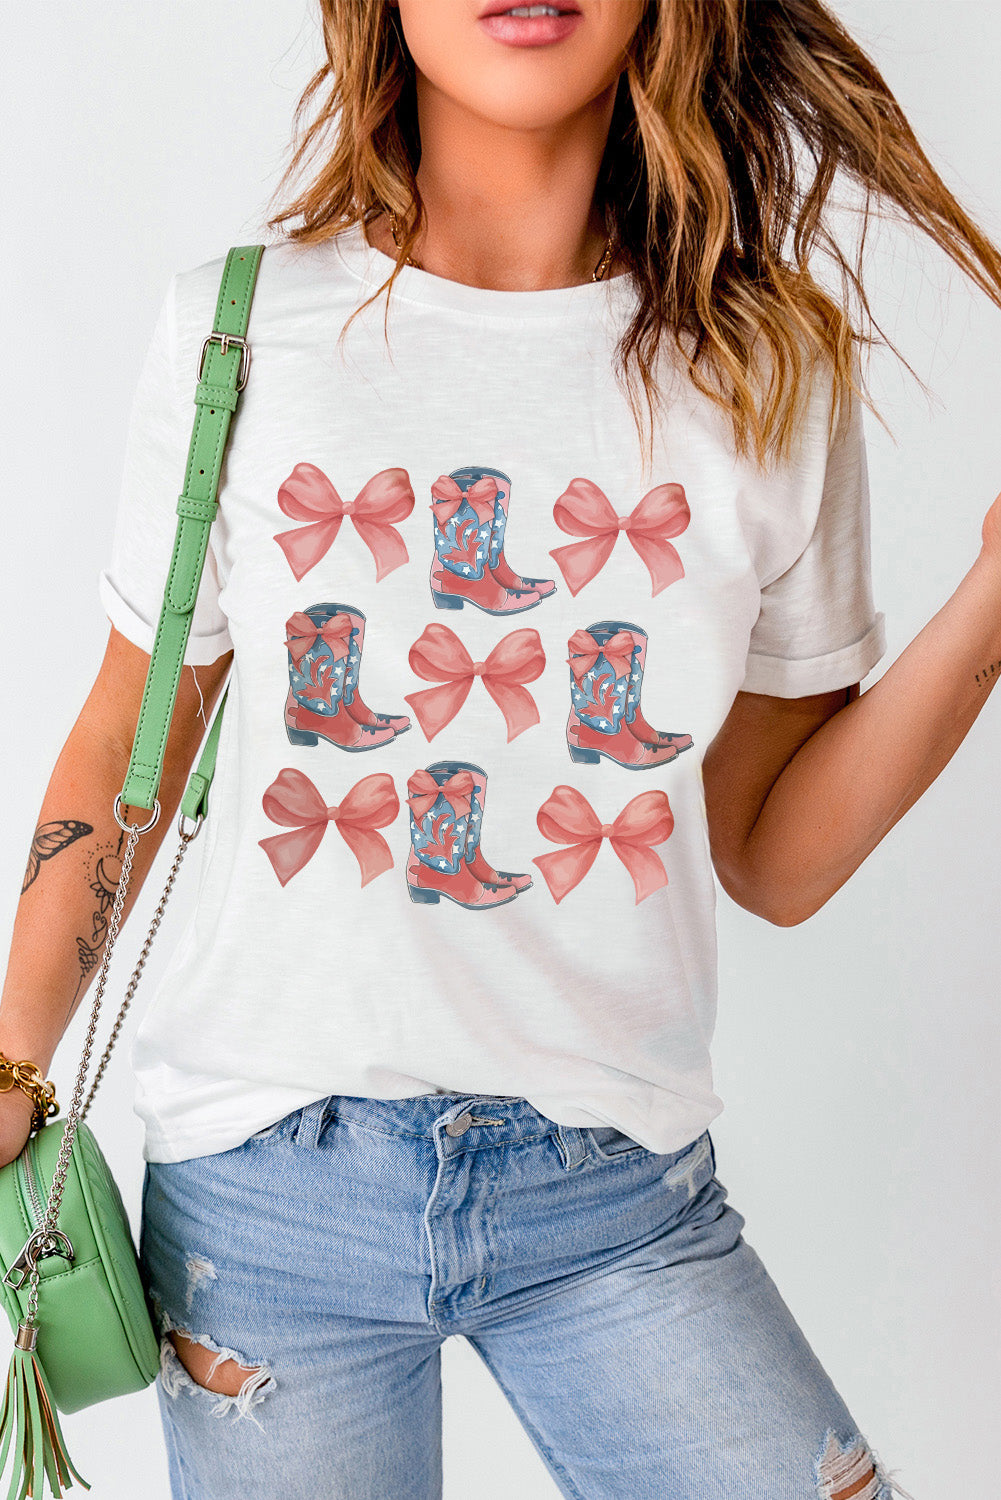 Boots & Bows Tee